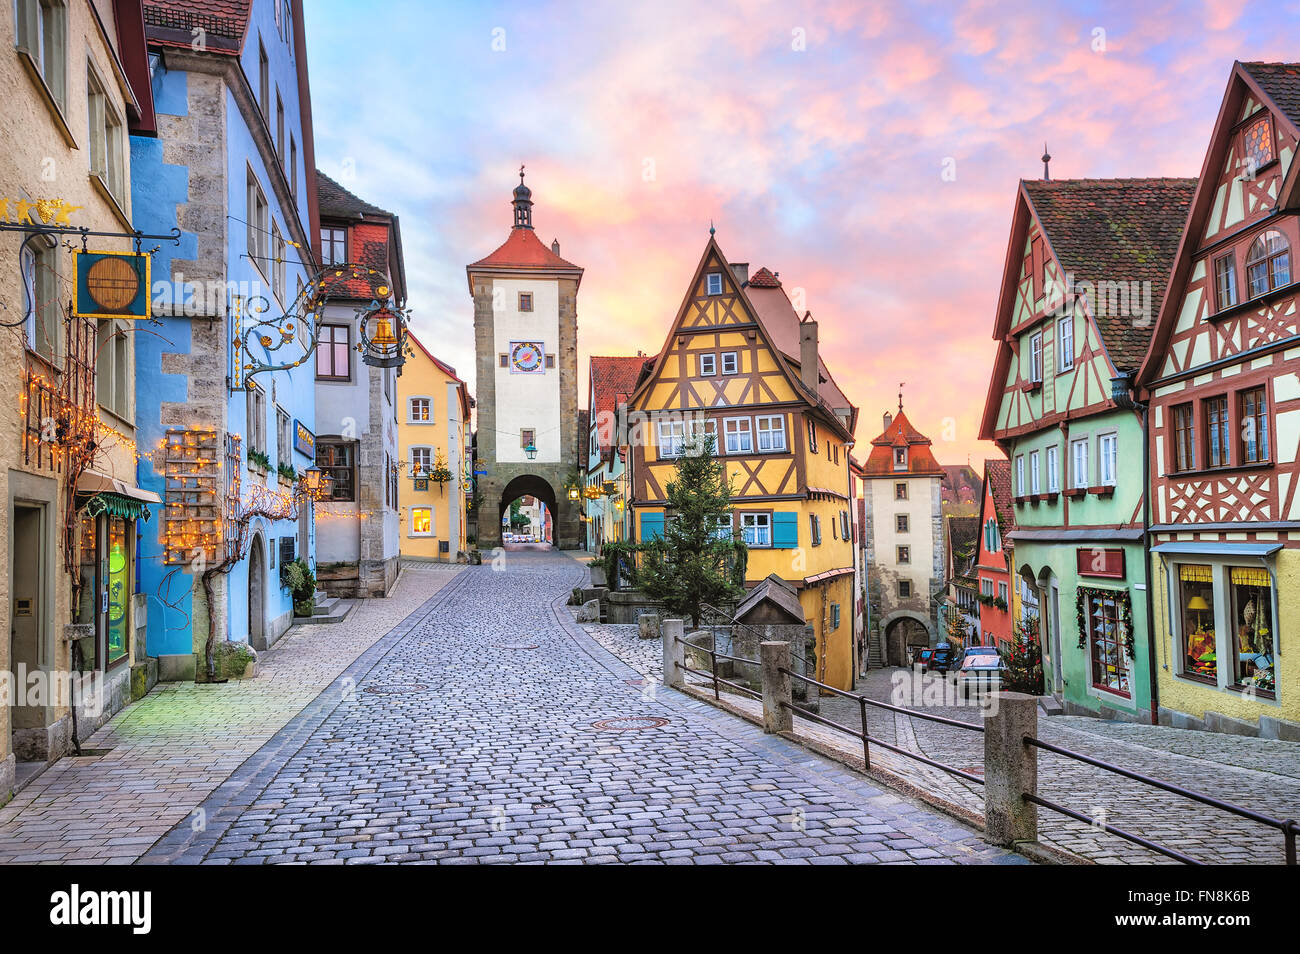 Colorful half-timbered houses in Rothenburg ob der Tauber, Germany Stock Photo